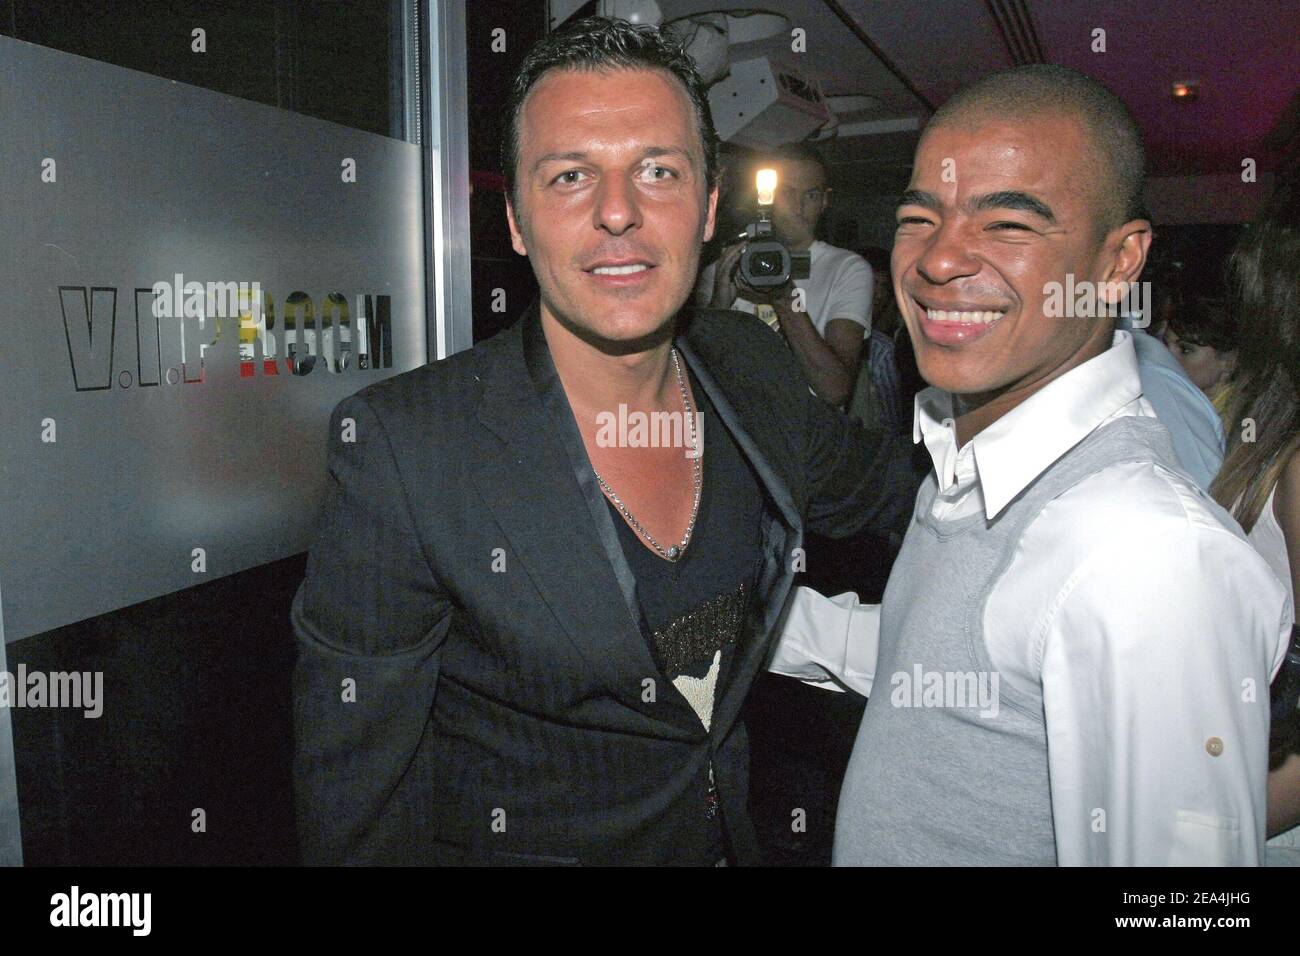 V.I.P. Room boss Jean Roch (L) poses with U.S. DJ Erick Morillo at the 'VIP  Room' in Saint-Tropez, southern France, on July 10, 2005. Photo by Benoit  Pinguet/ABACAPRESS.COM Stock Photo - Alamy